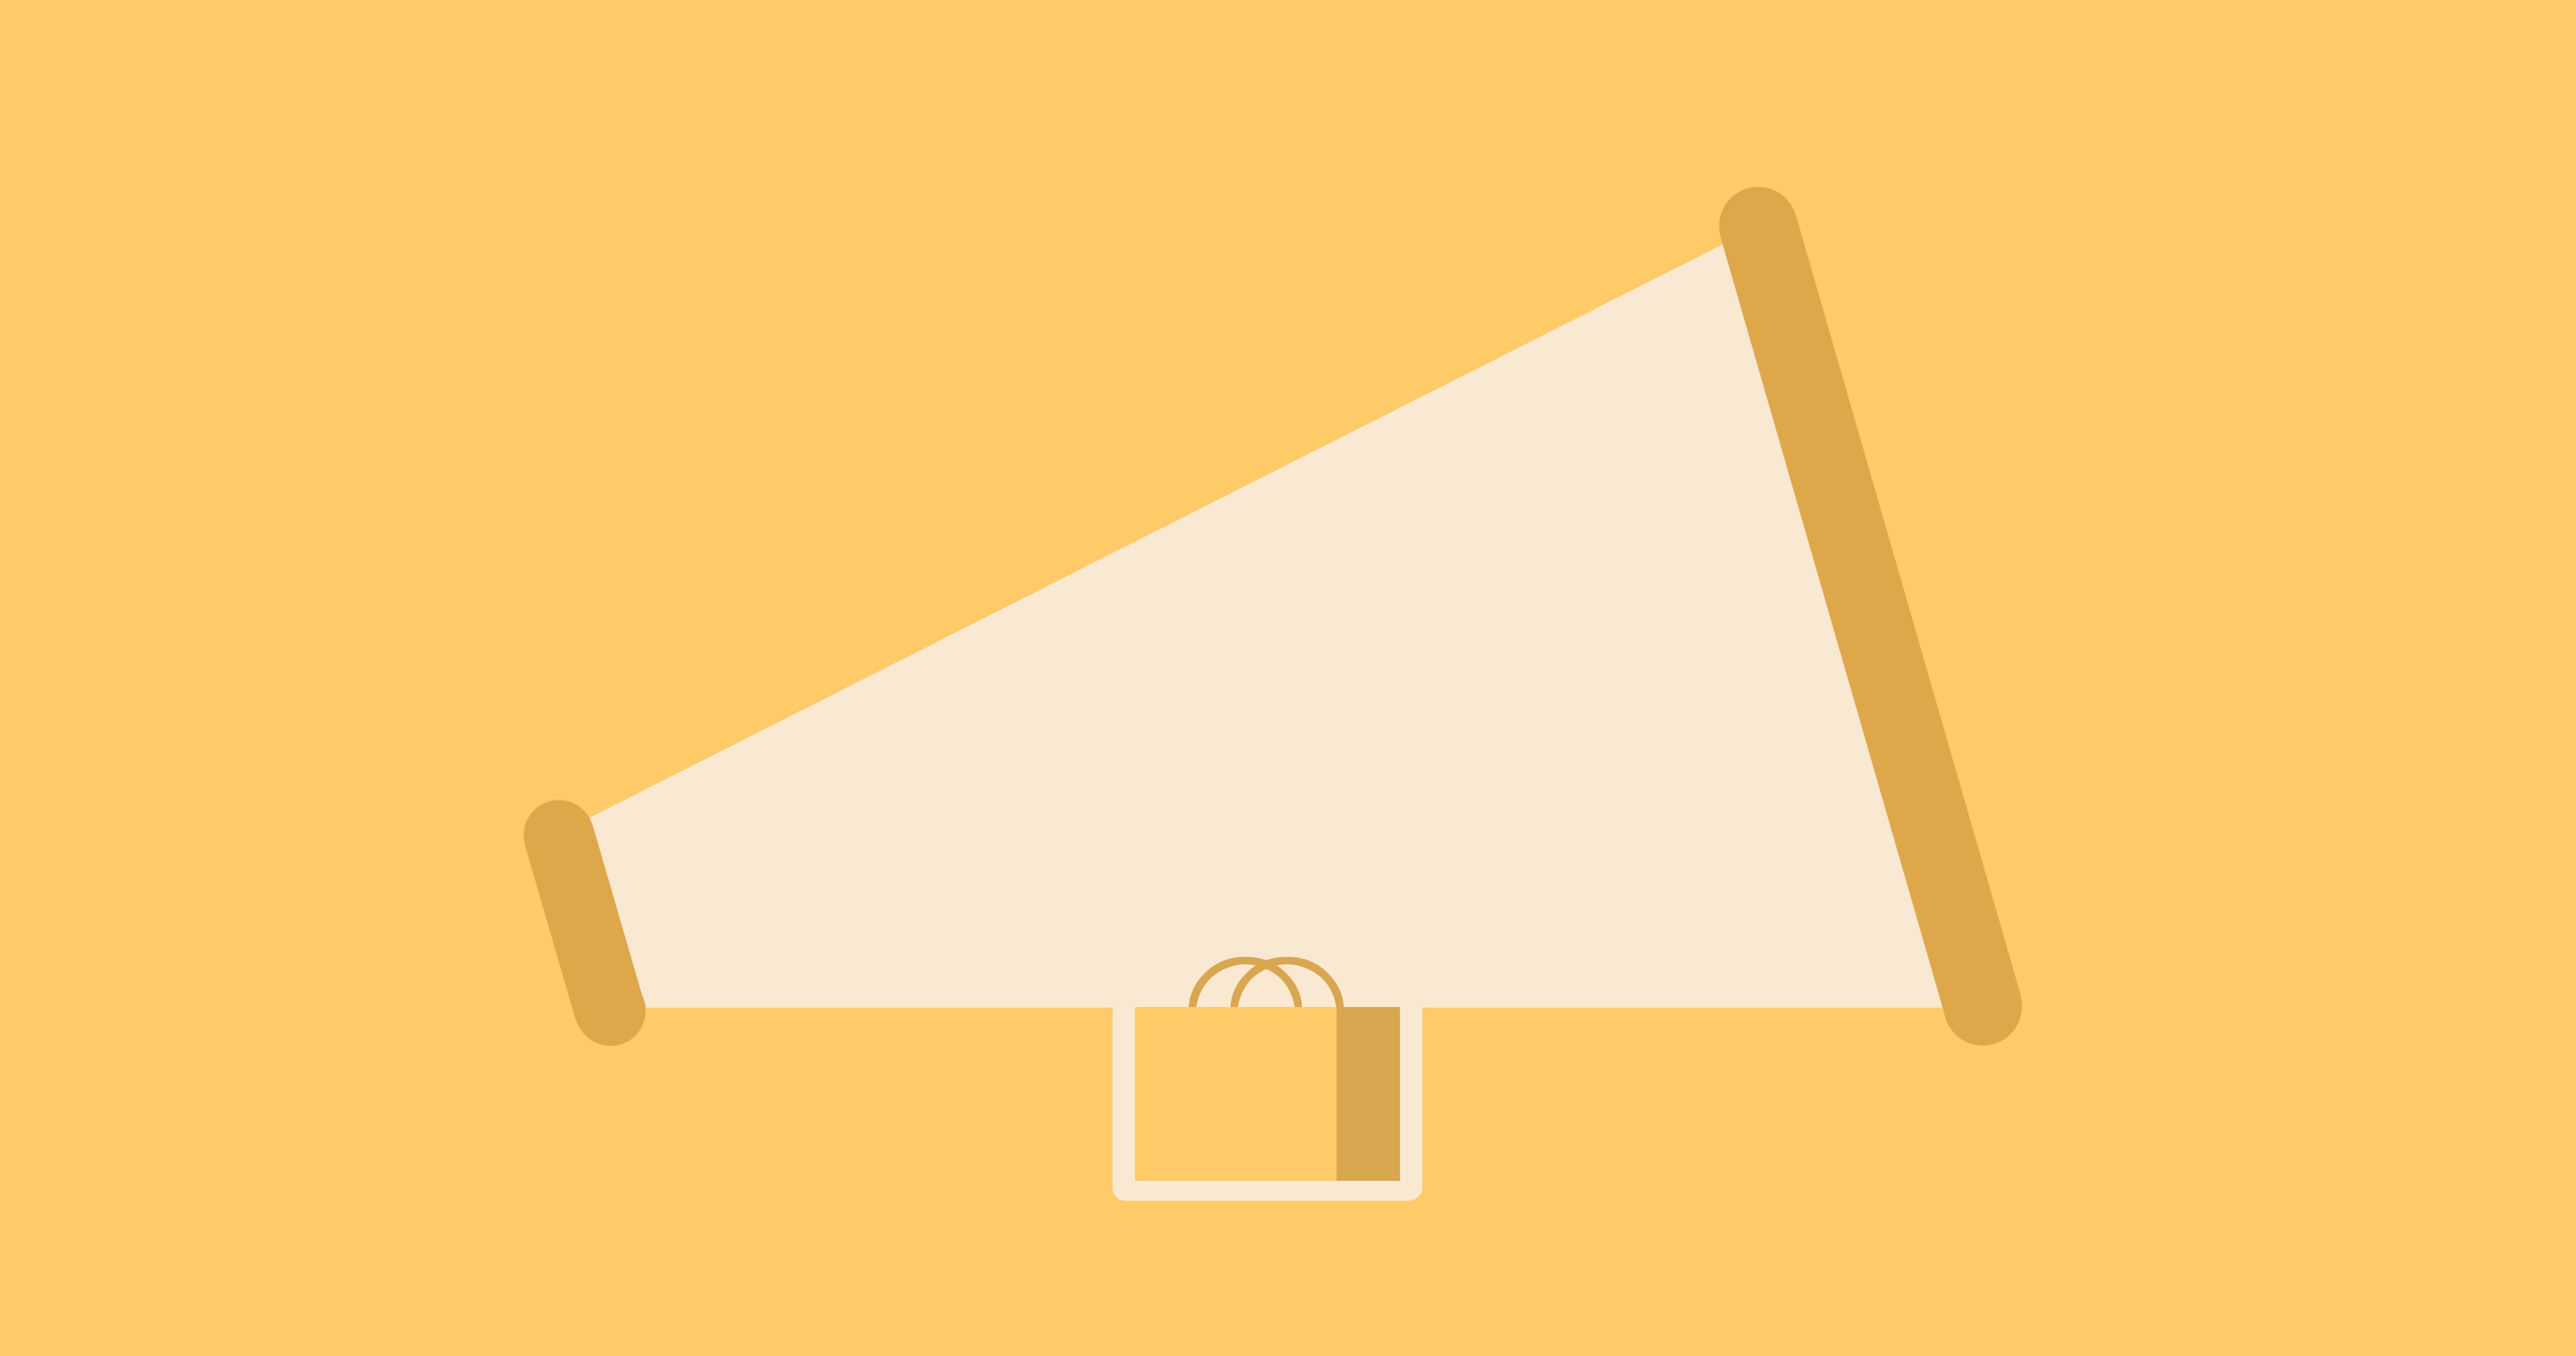 An illustration of a megaphone sits on top of a shopping bag against a yellow background